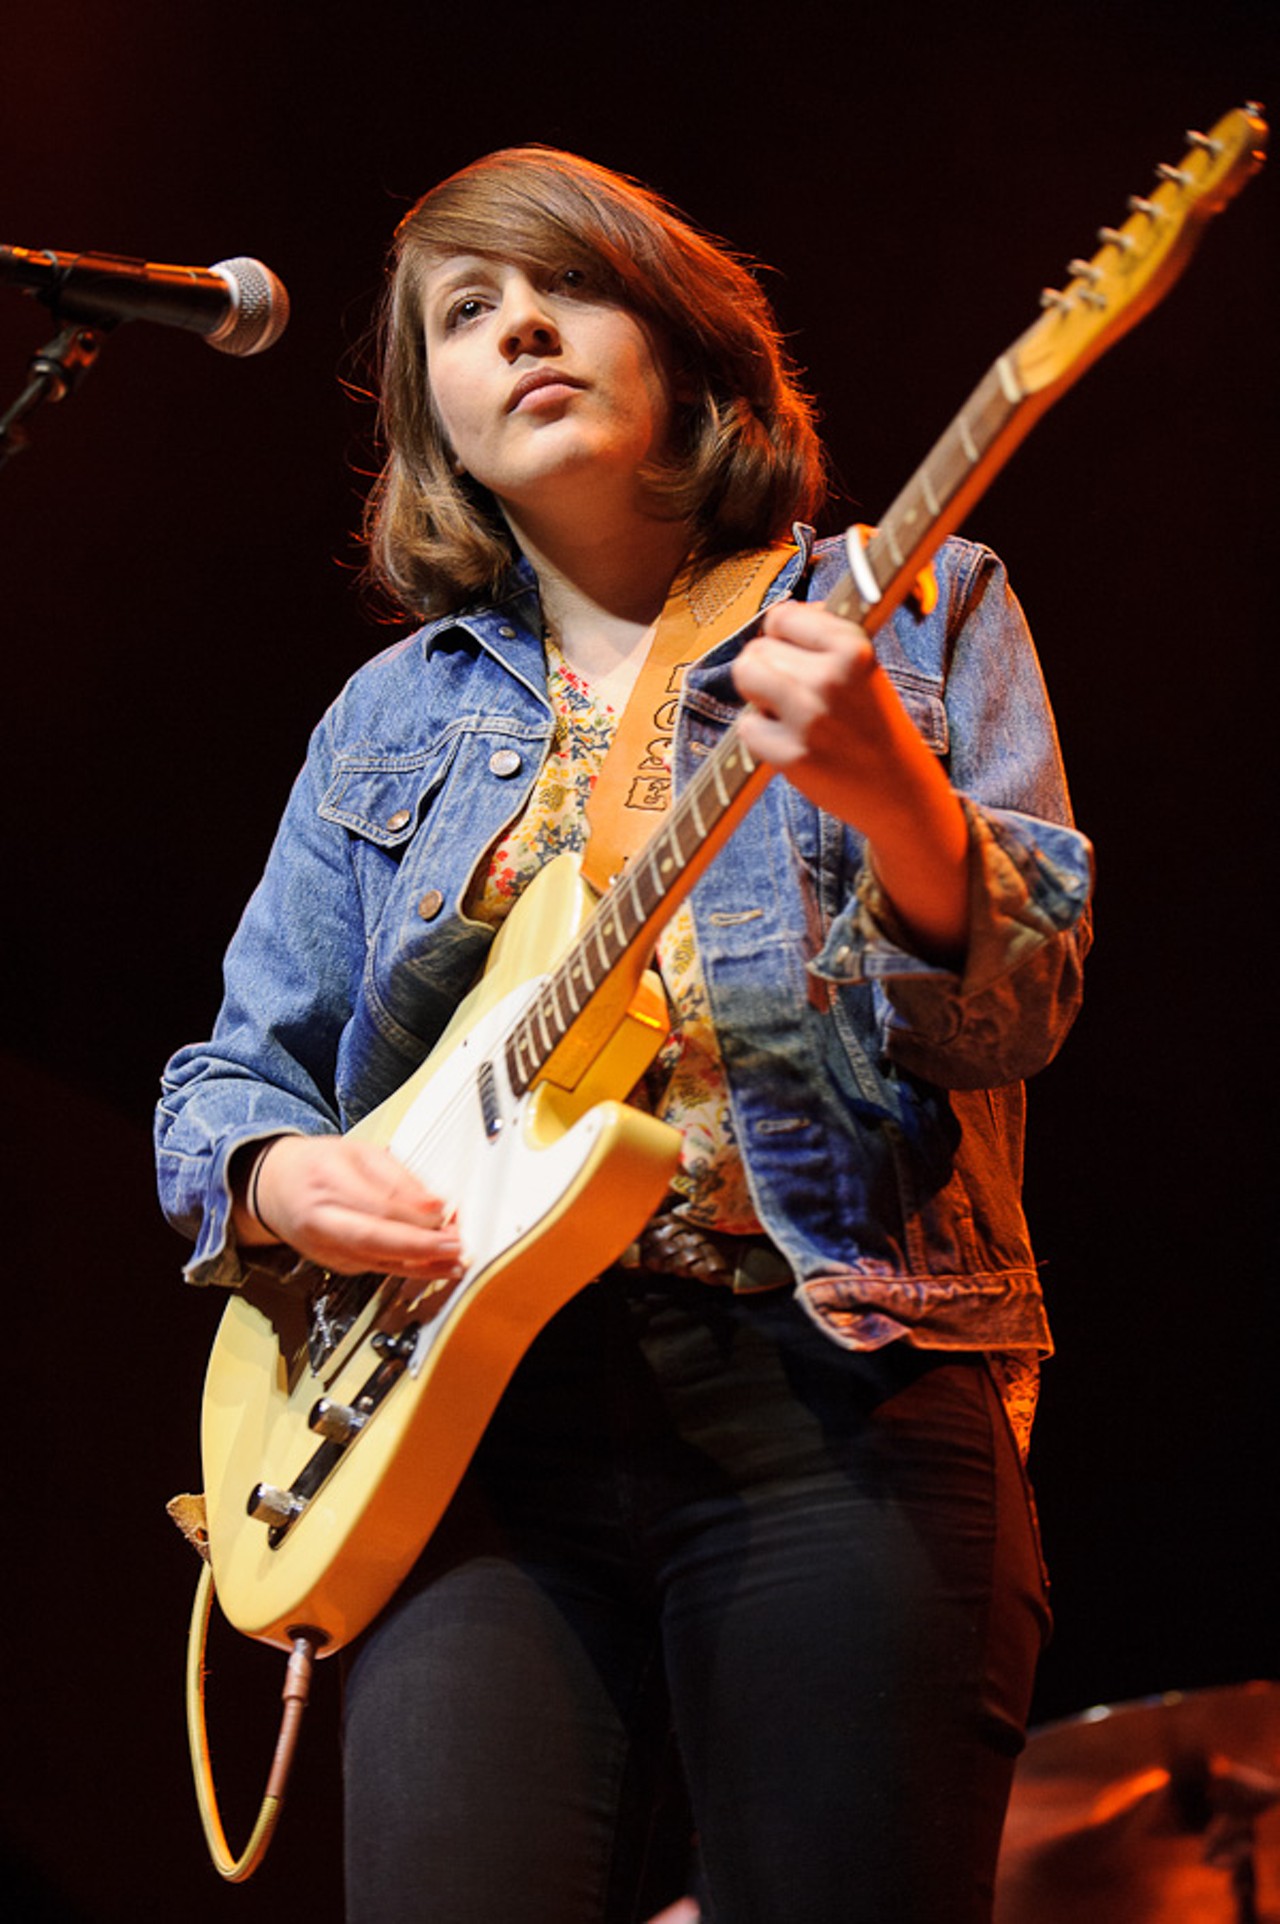 Caitlin Rose opening for the Old 97s at The Pageant in St. Louis, Missouri on January 31, 2012.